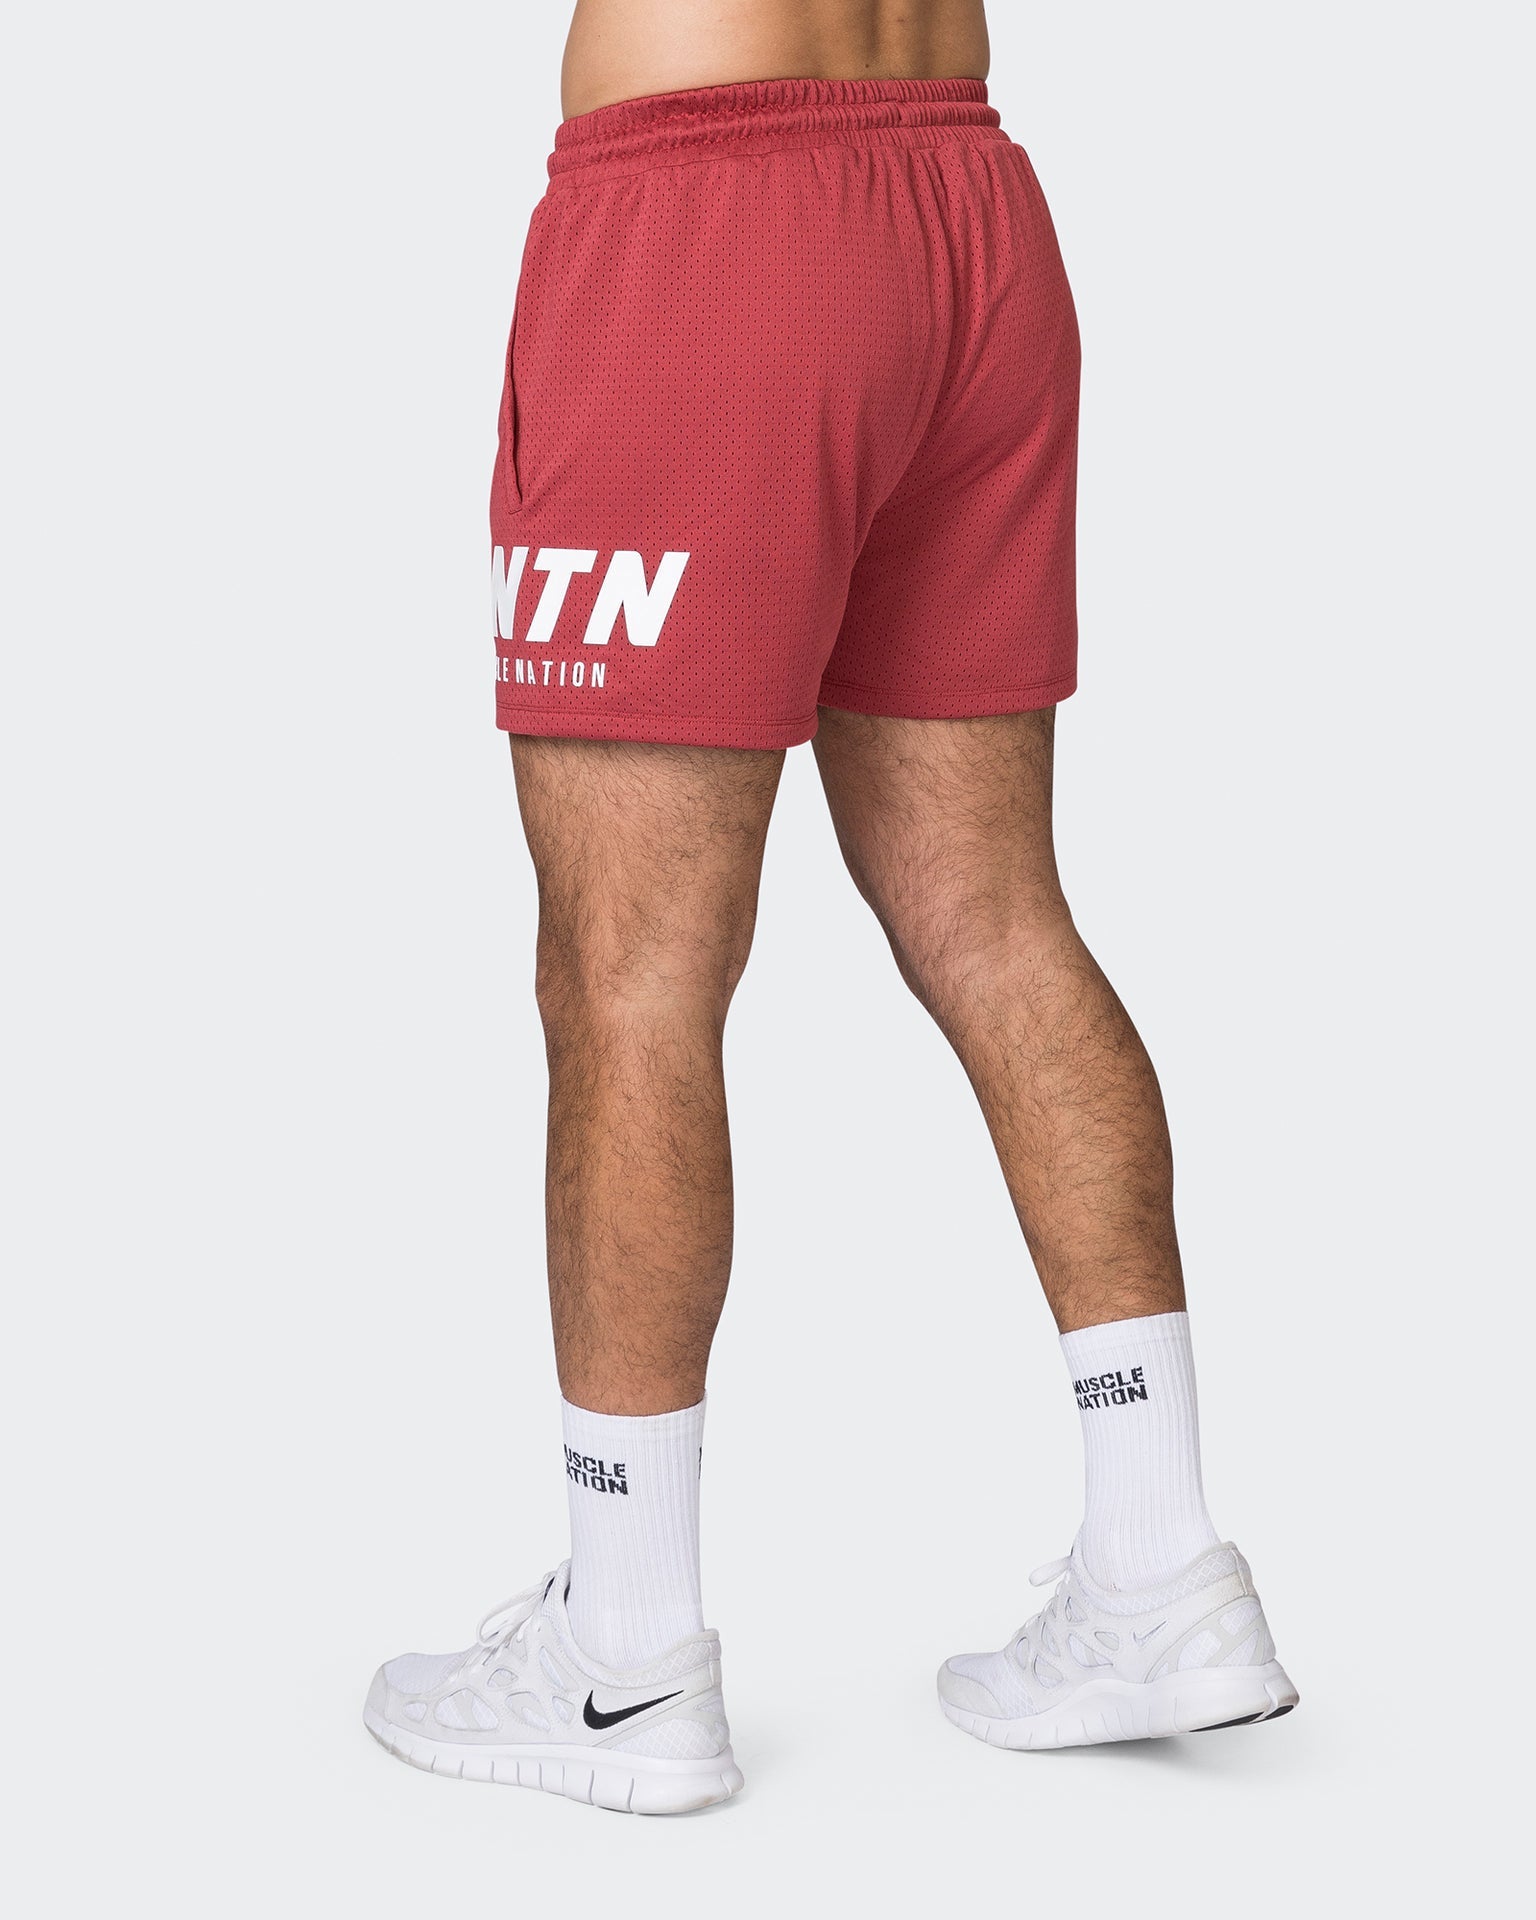 Muscle Nation Gym Shorts MNTN Lay Up 3.5" Shorts - Dusty Red